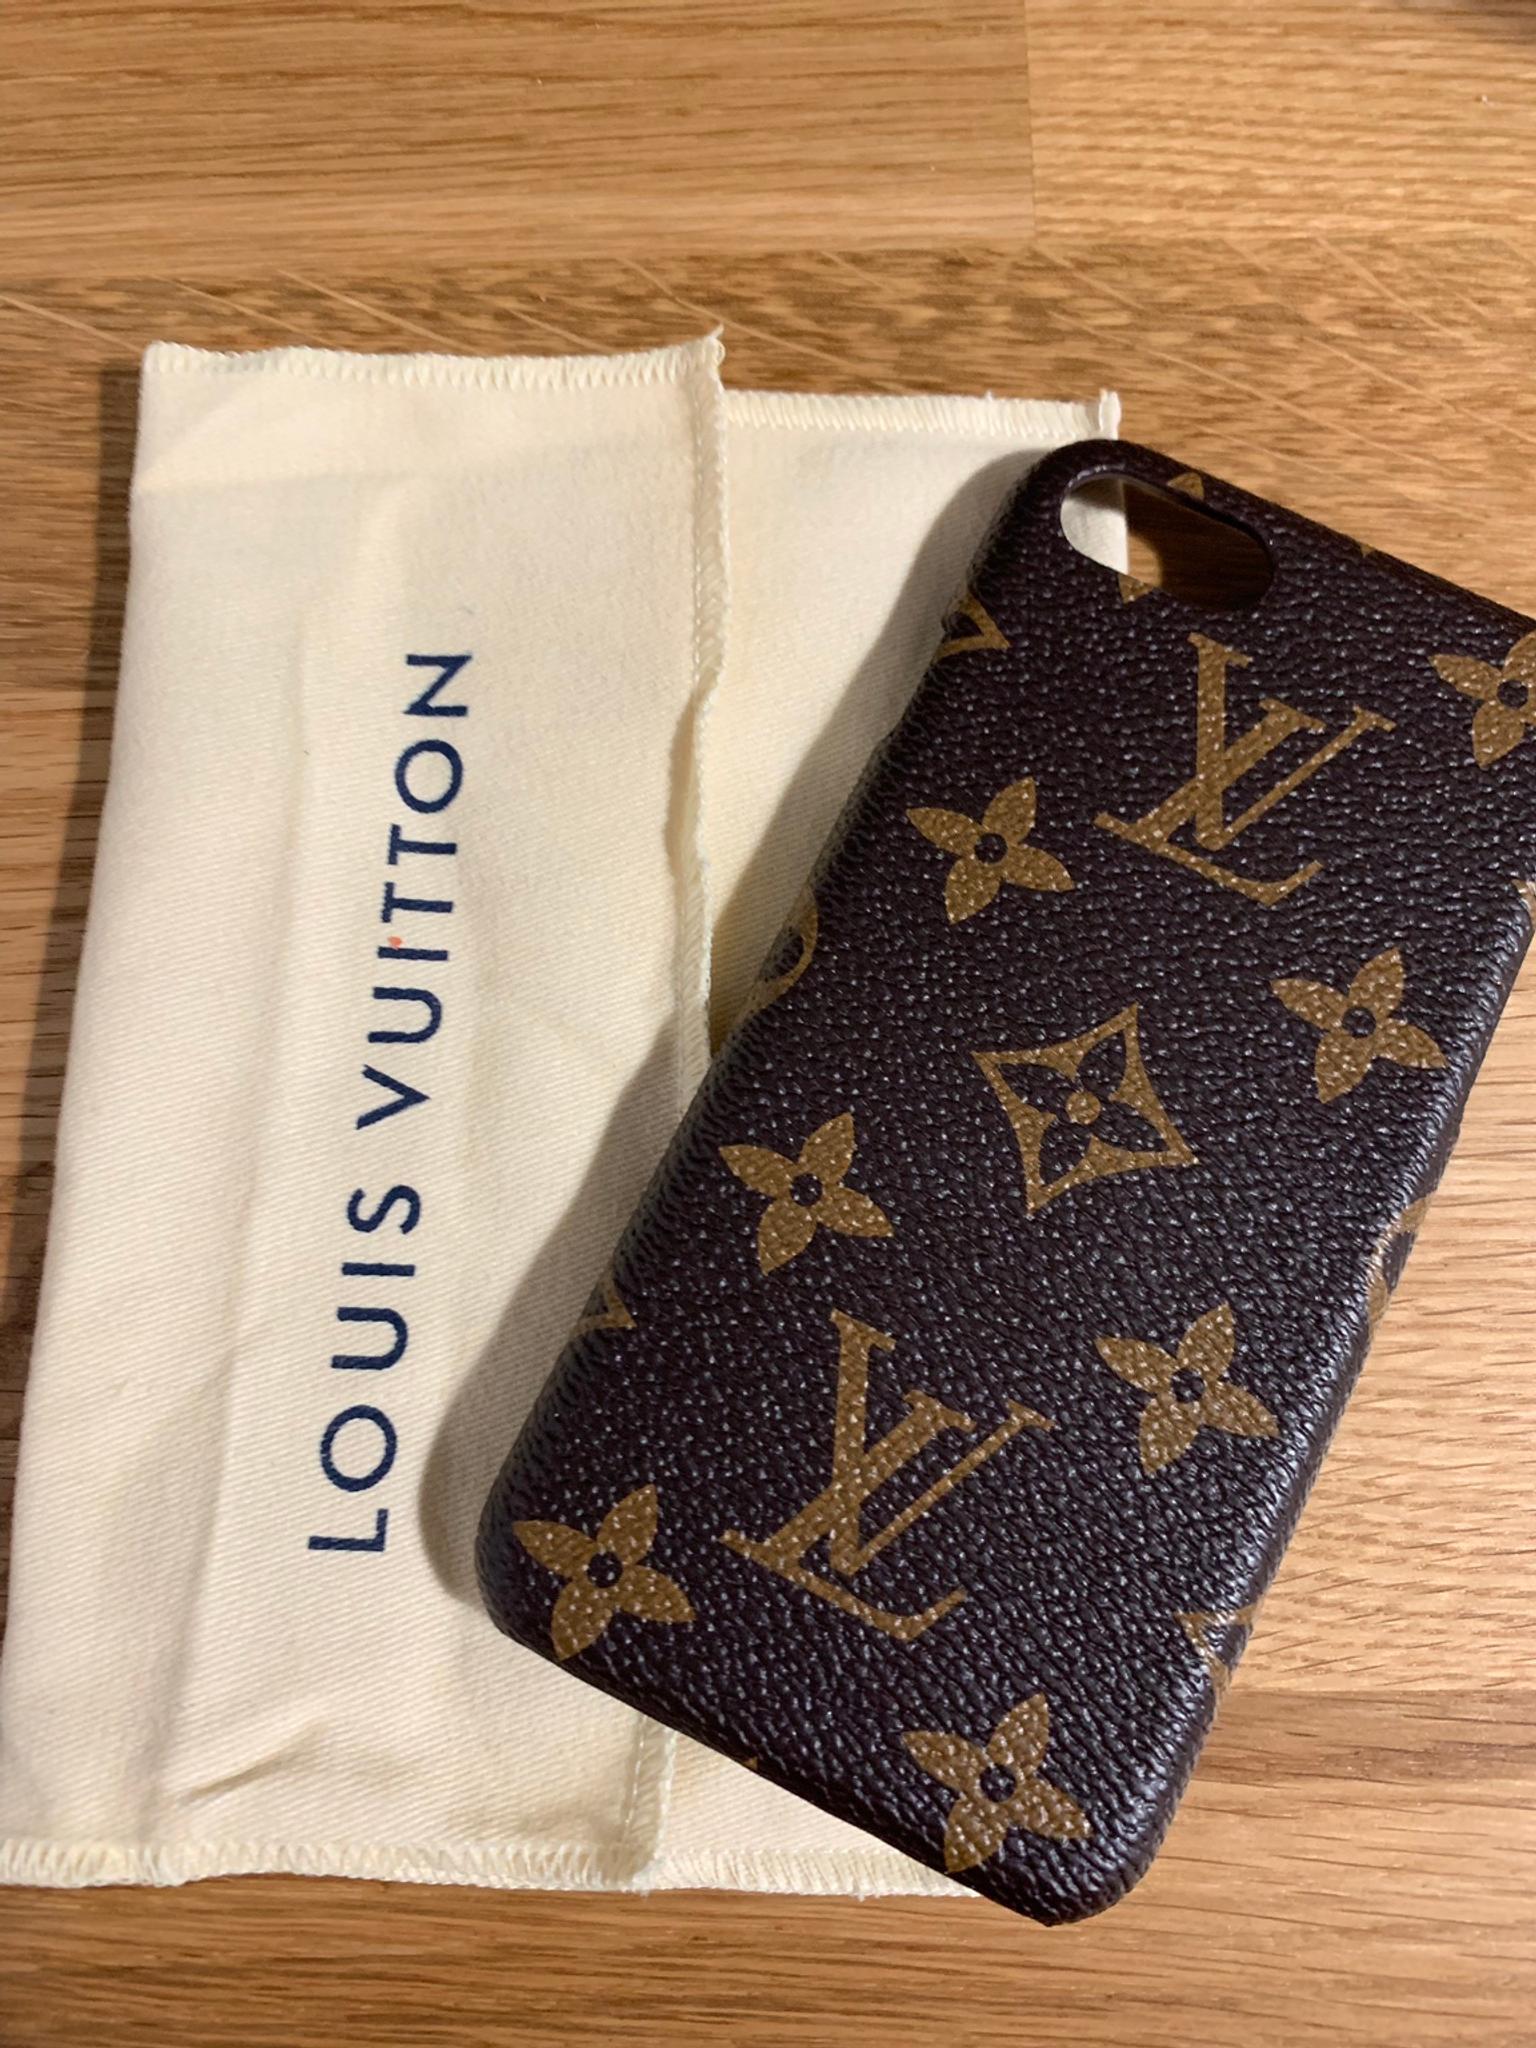 Cover case iPhone 7/ iPhone 8 Louis Vuitton in 10042 Nichelino for €75.00 for sale | Shpock